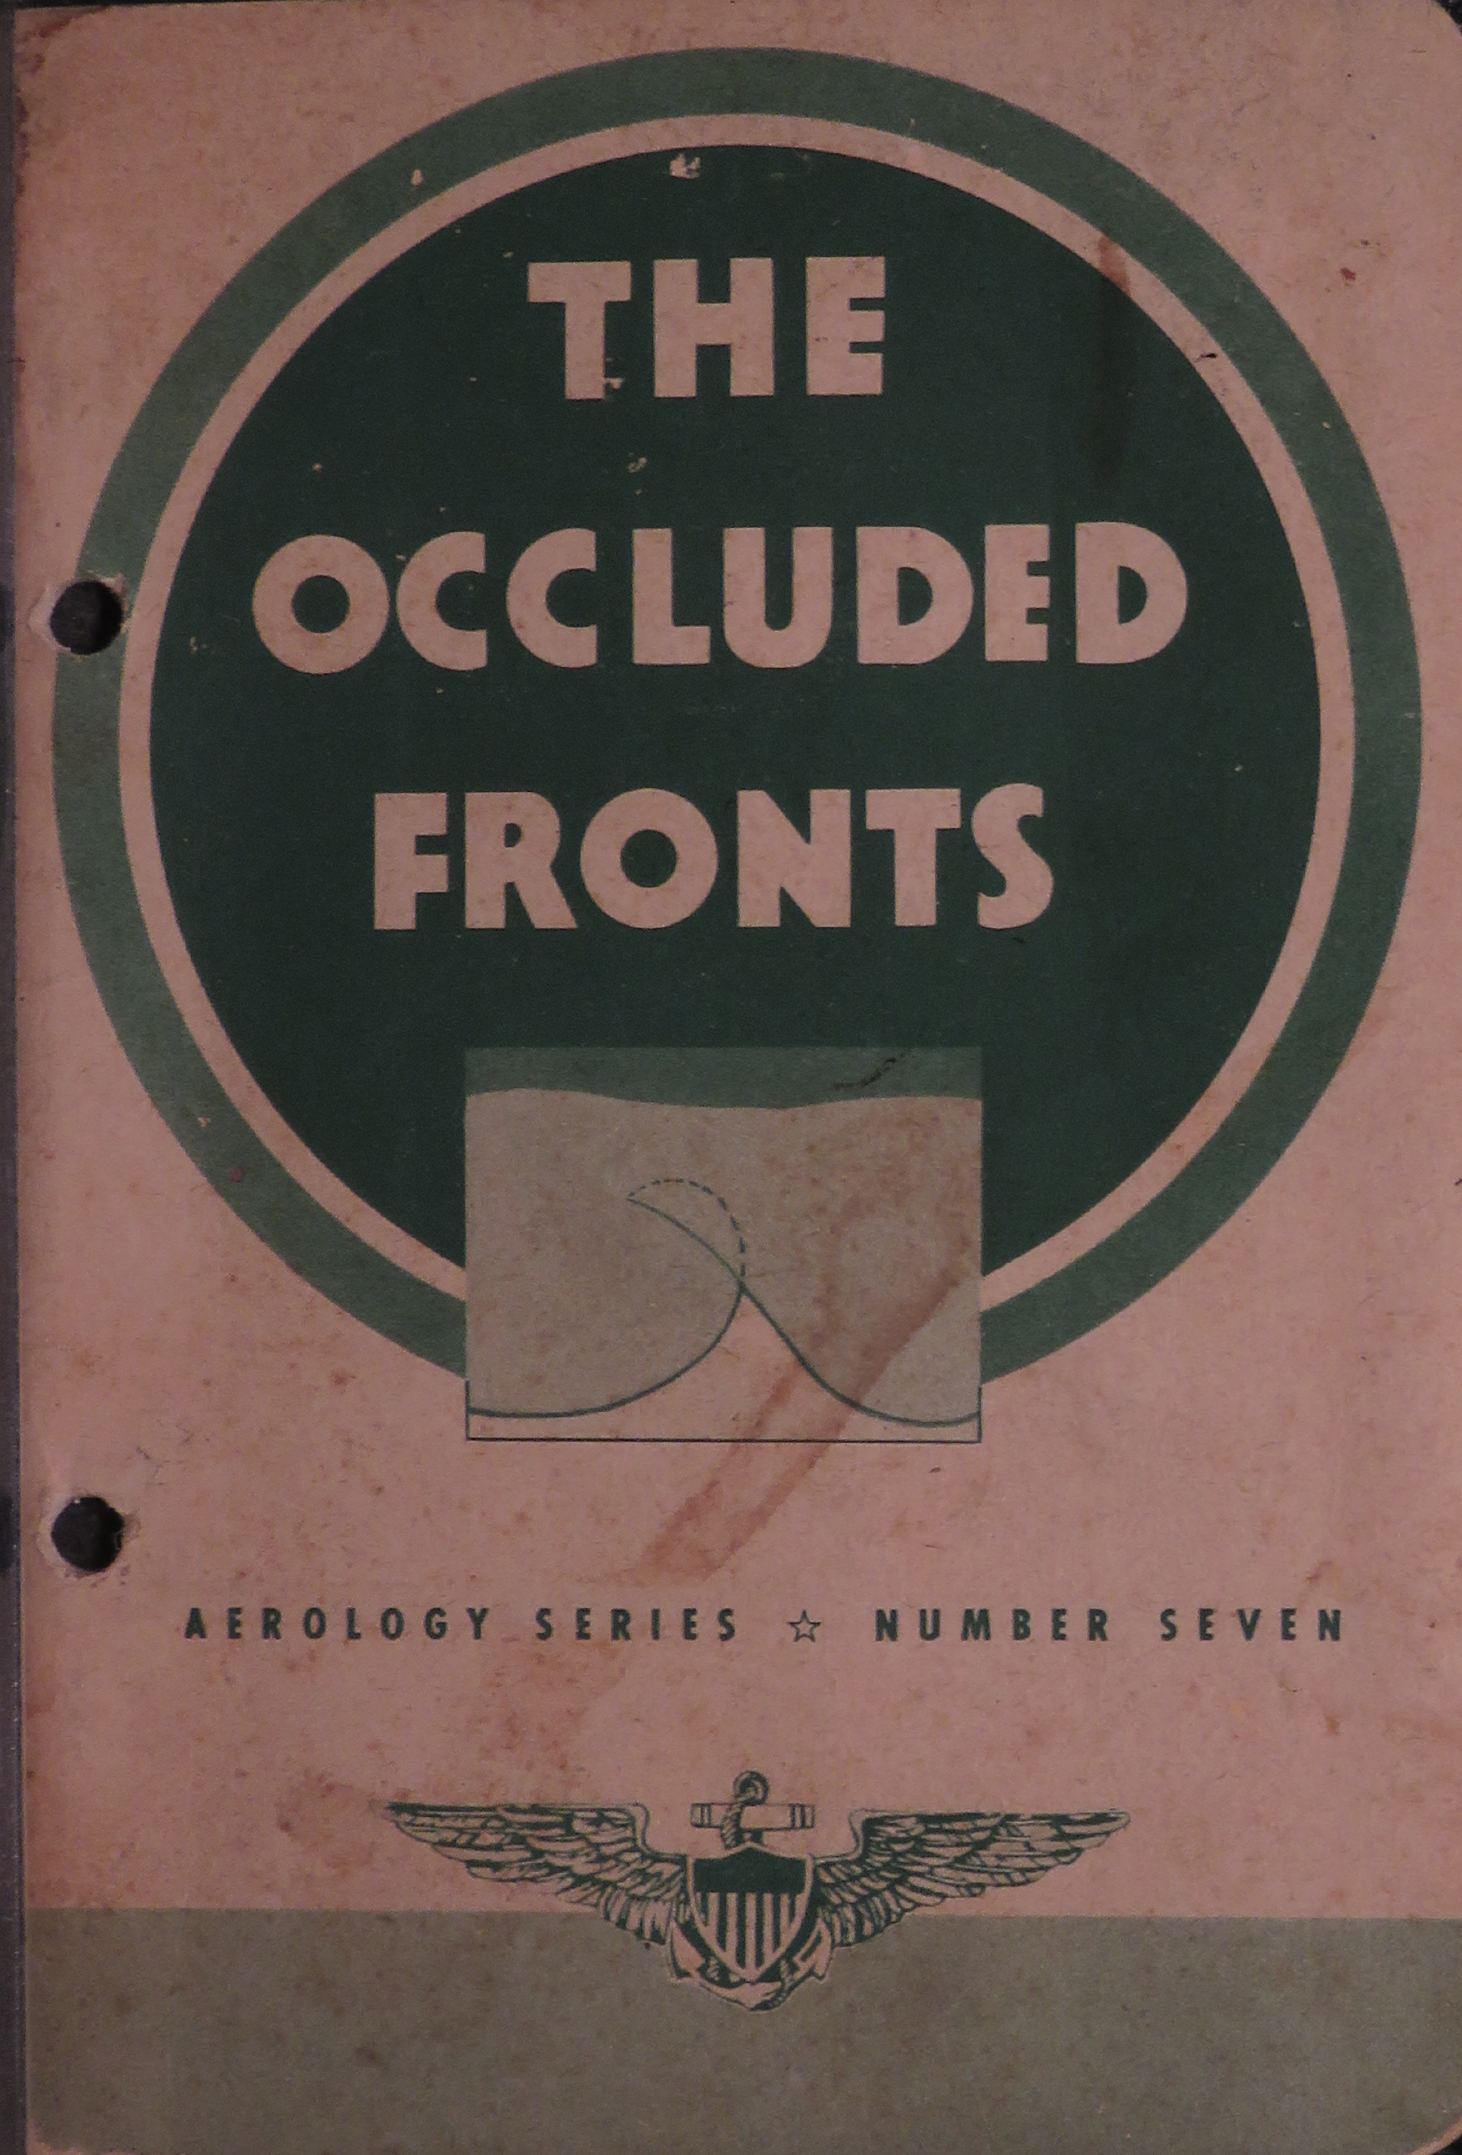 Sample page 1 from AirCorps Library document: Aerology Series No. 7; The Occluded Fronts